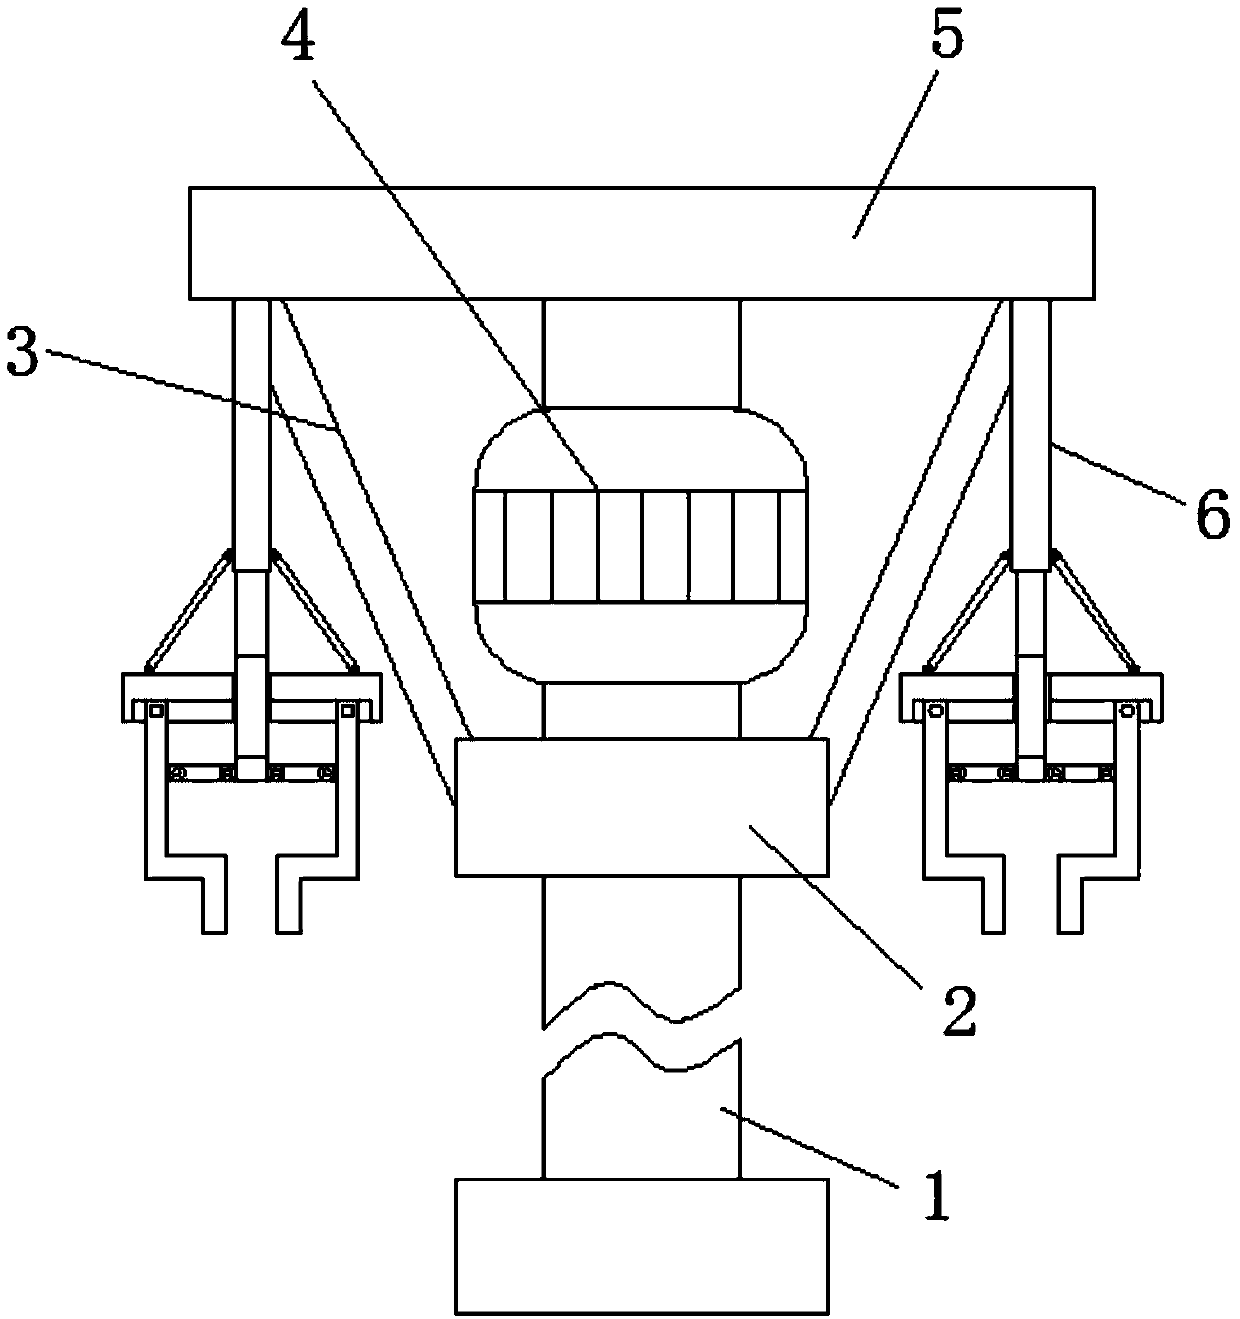 A clamping device for heat treatment of agricultural machinery workpiece